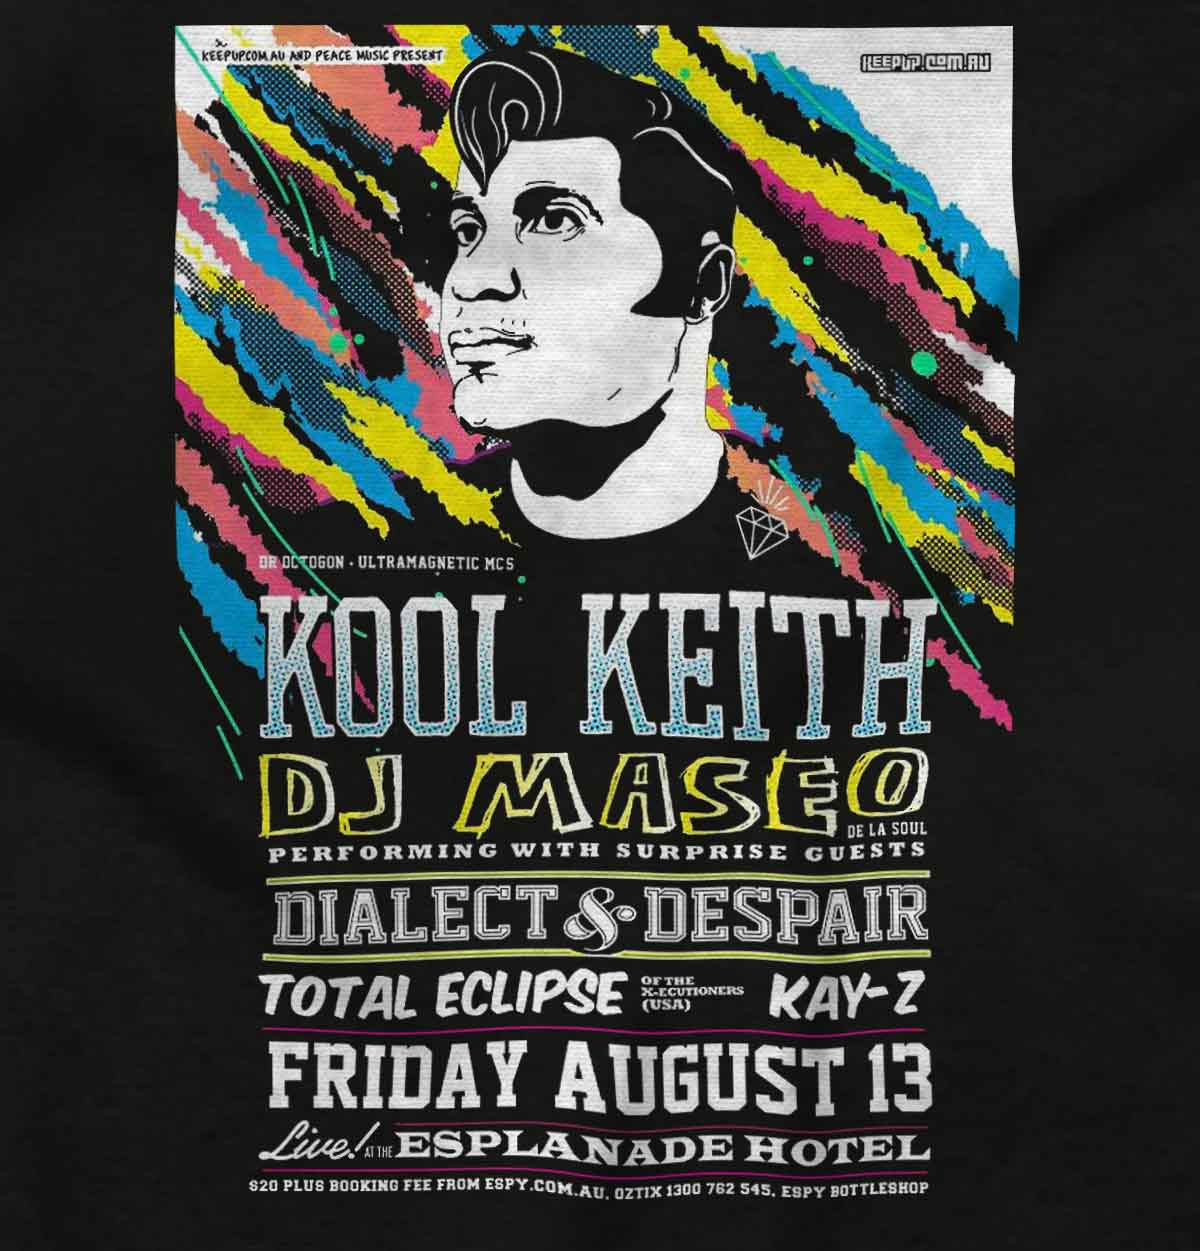 This image captures the energetic and unforgettable atmosphere of a hip-hop concert with Kool Keith and DJ Maseo. It represents the groove, rhythm, and passion of their legendary performance at the Esplanade Hotel. A symbol of the timeless message and culture that hip-hop embodies.